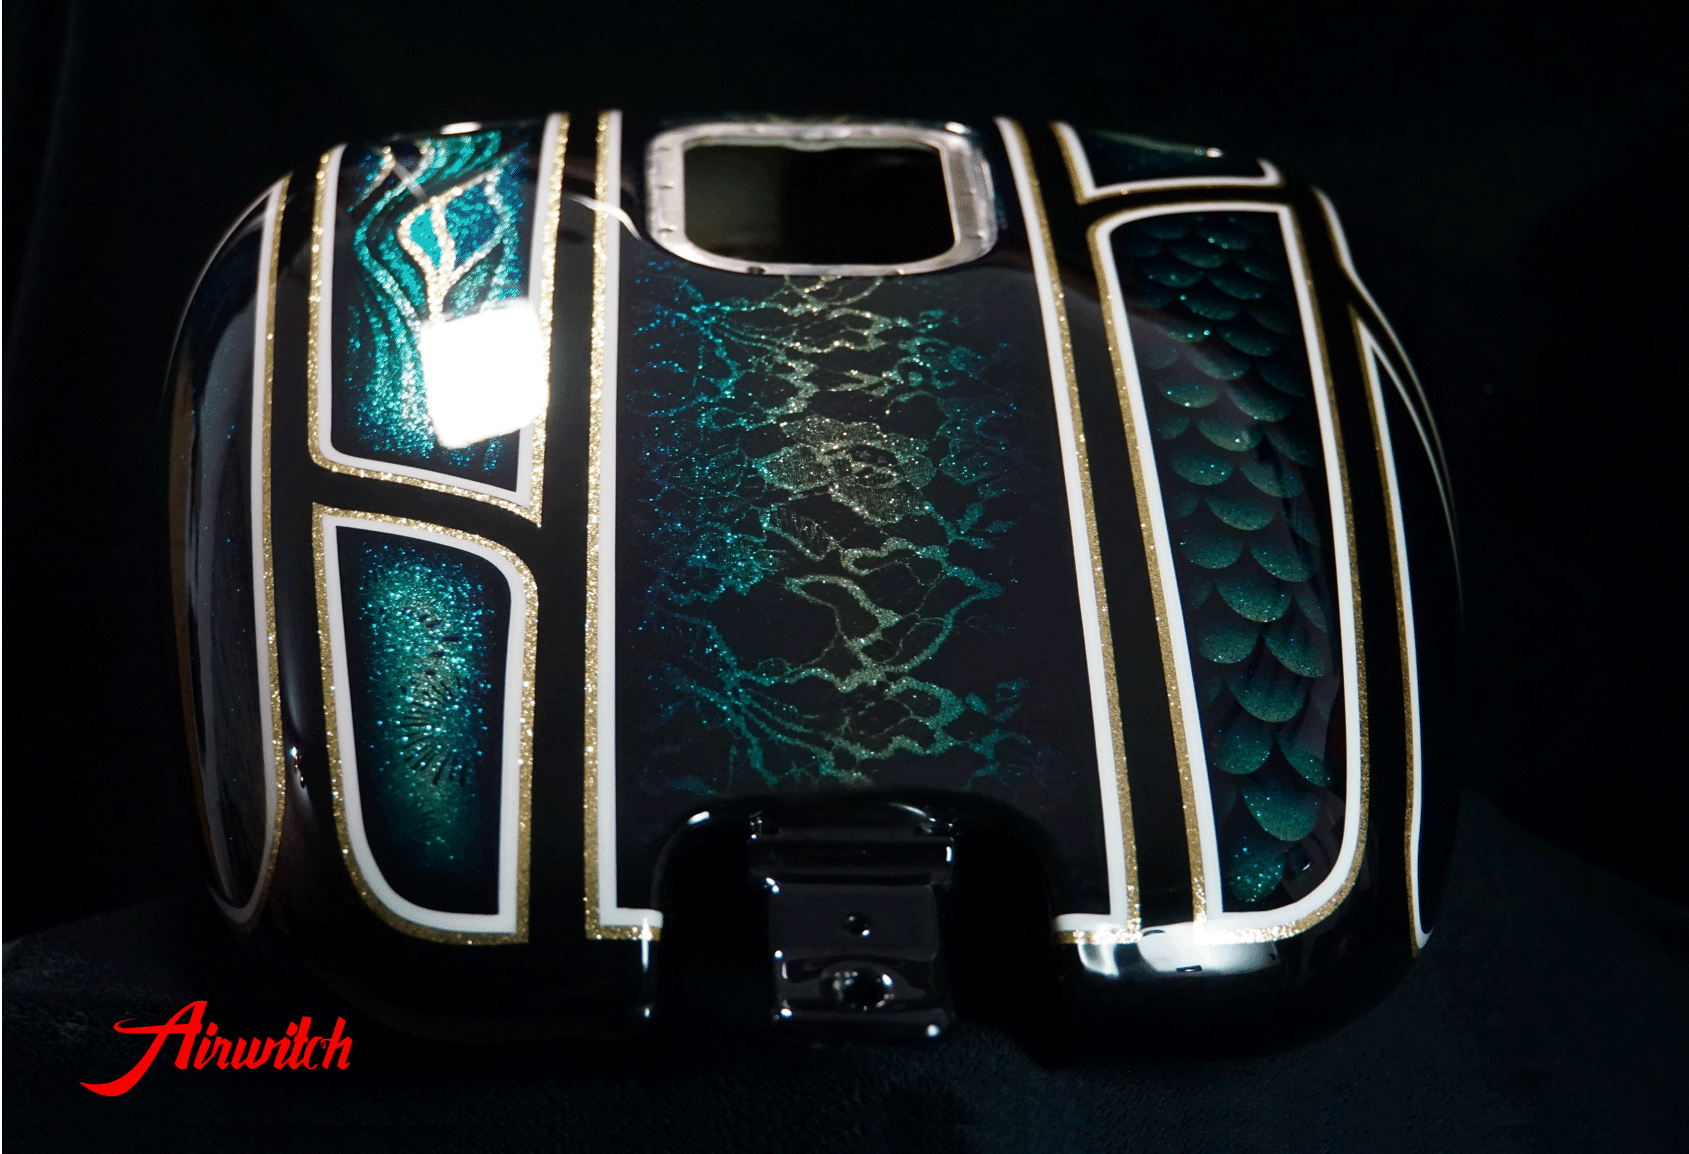 Custom Paint Harley Davidson Softail Metalflake Lackierung with oldschool fish scales frisco pattern blue turquoise gold black